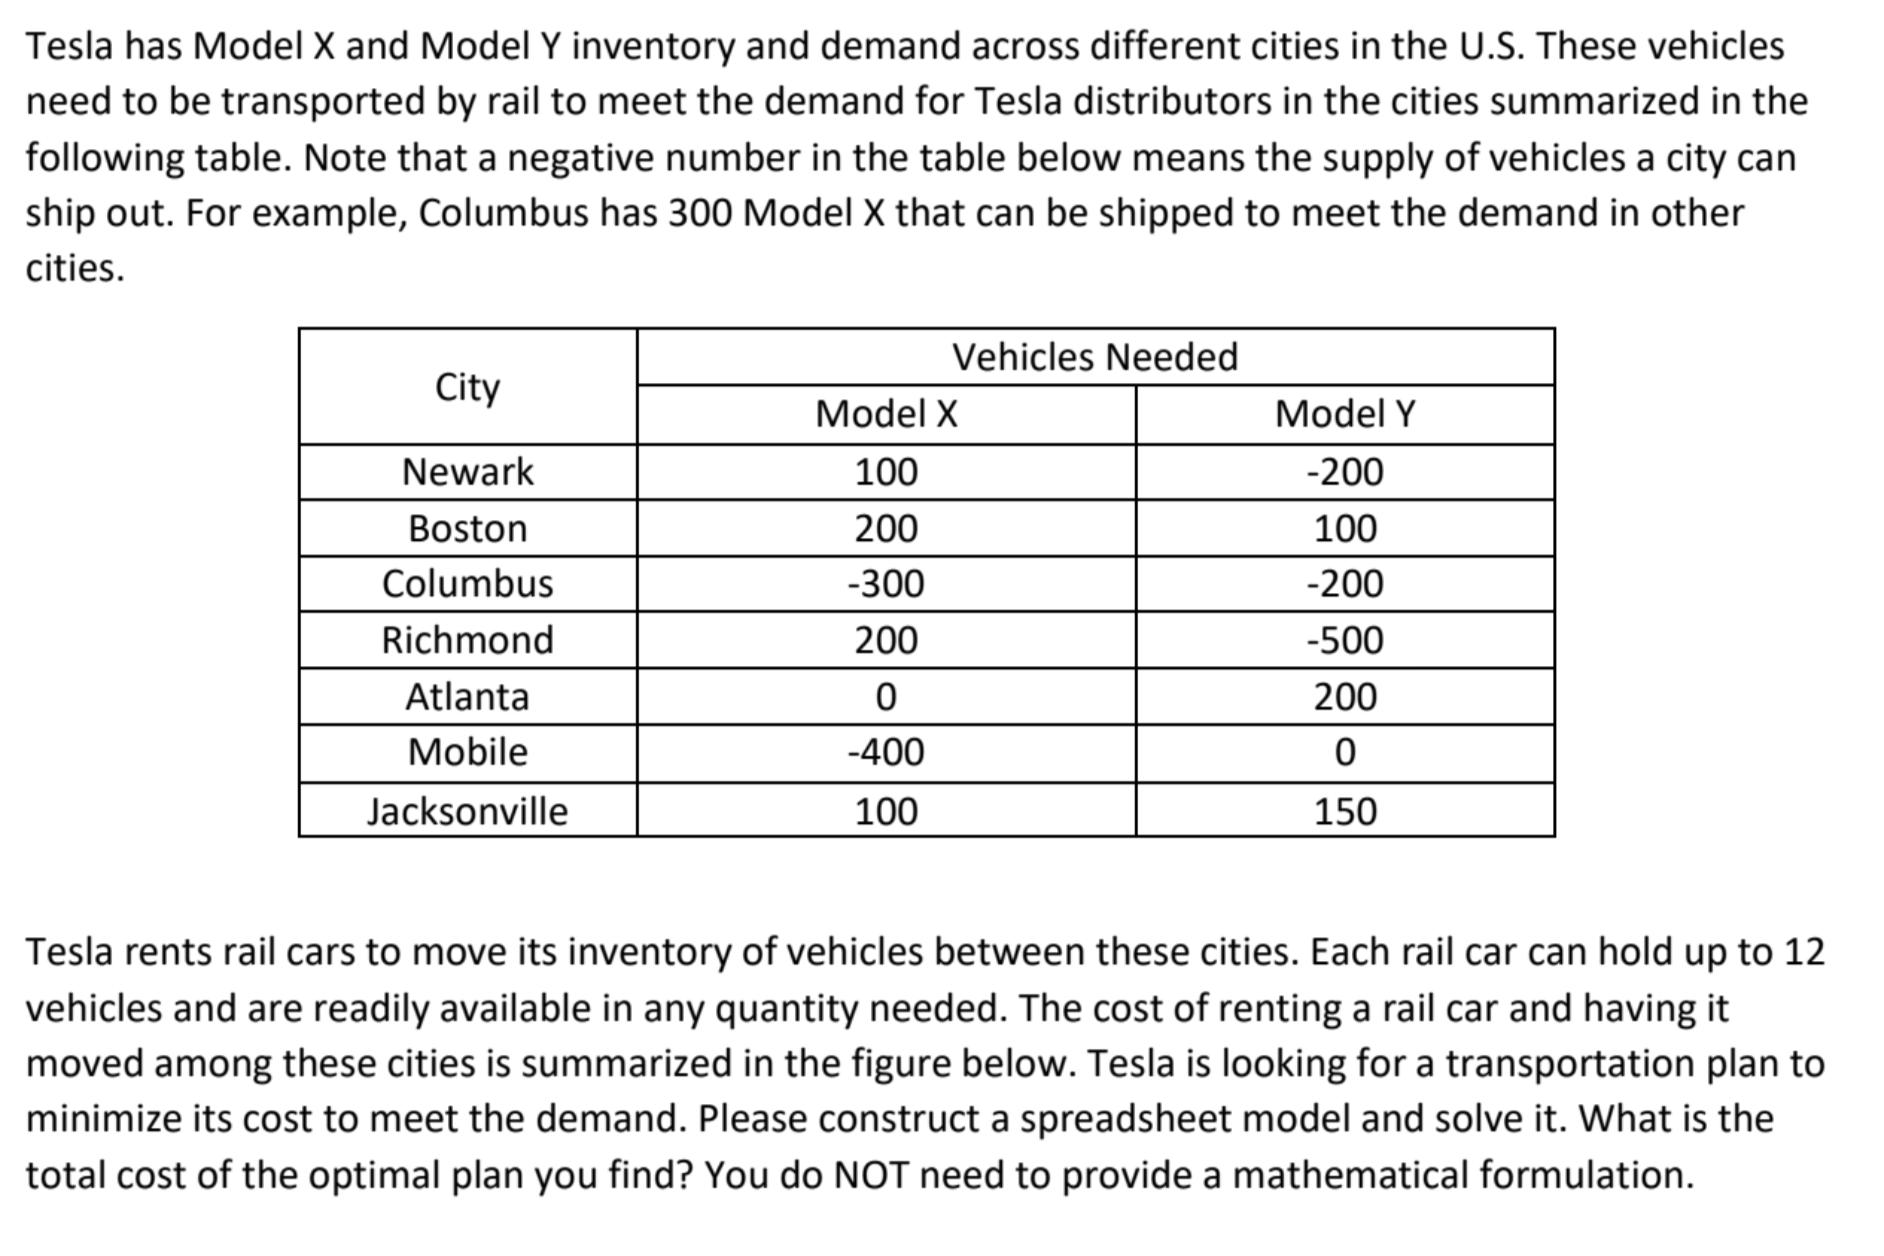 Tesla has Model X and Model Y inventory and demand across different cities in the U.S. These vehicles need to